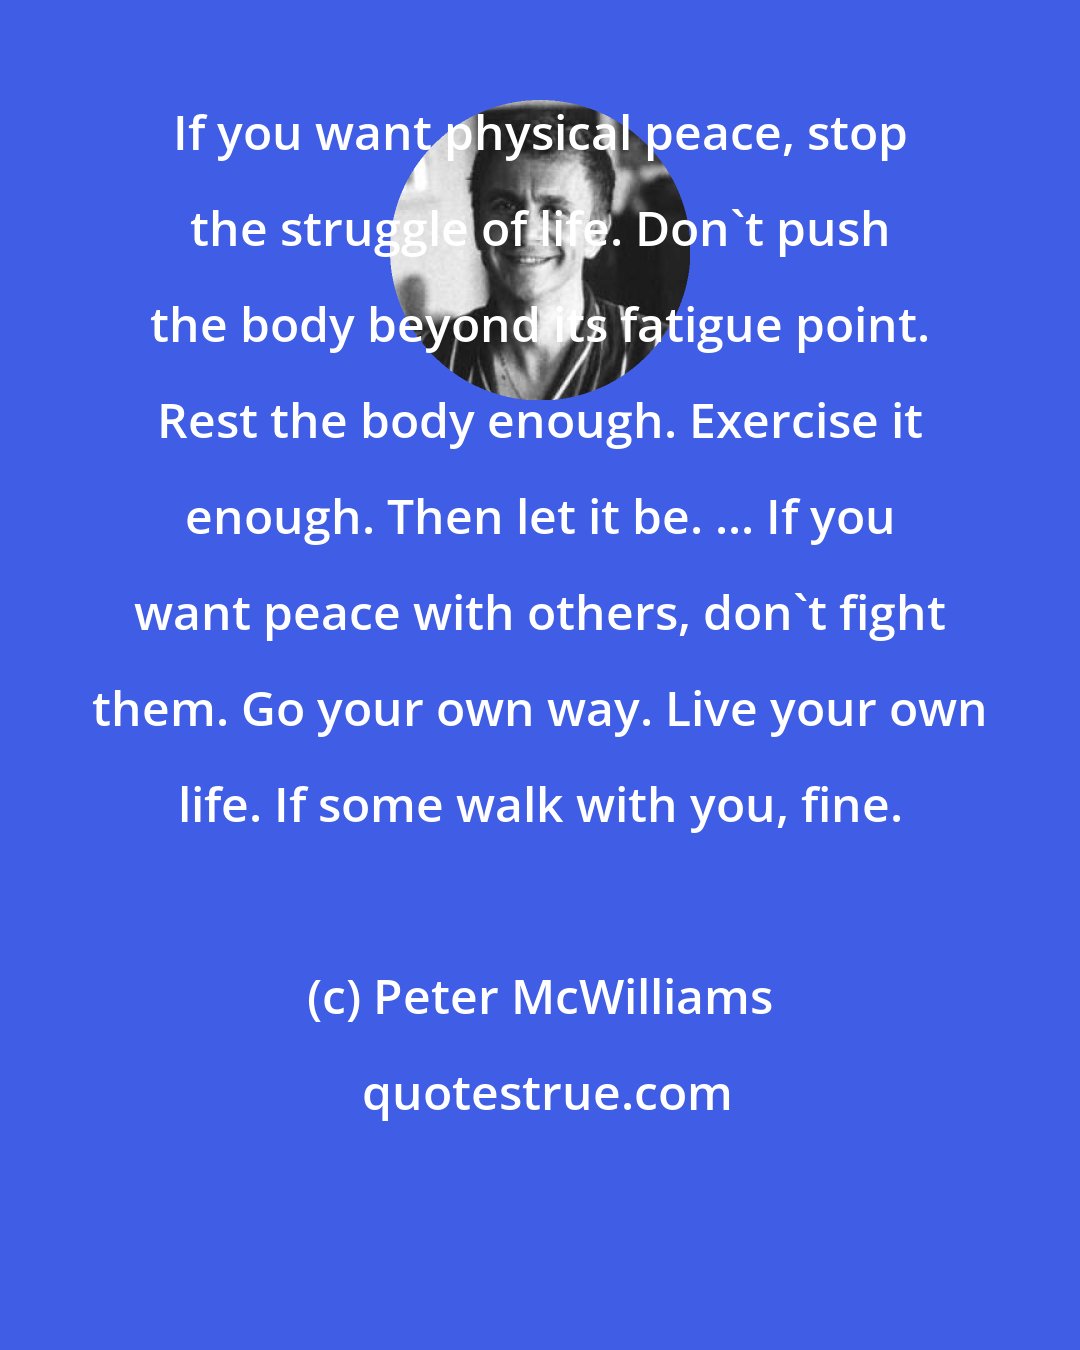 Peter McWilliams: If you want physical peace, stop the struggle of life. Don't push the body beyond its fatigue point. Rest the body enough. Exercise it enough. Then let it be. ... If you want peace with others, don't fight them. Go your own way. Live your own life. If some walk with you, fine.